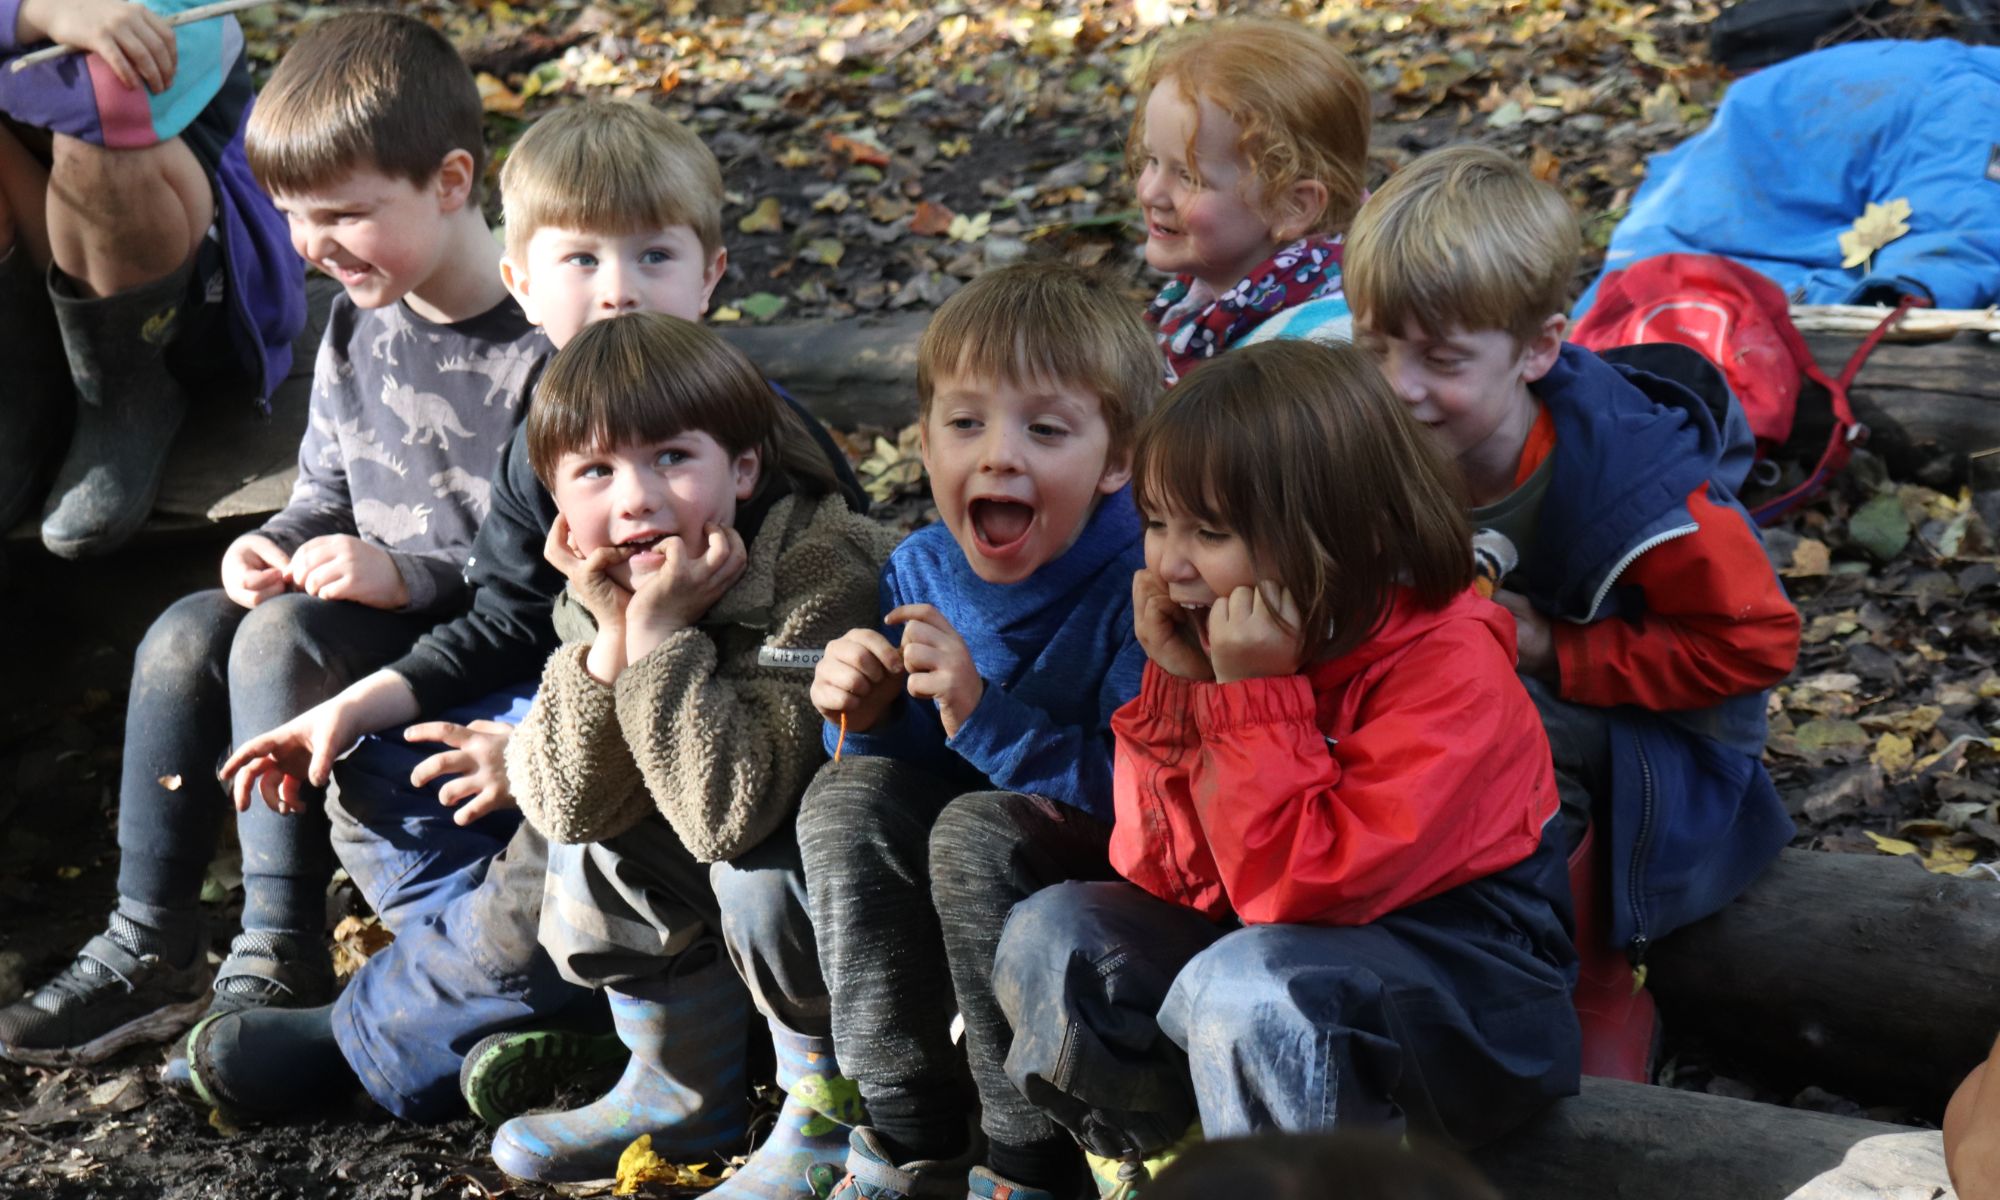 A group of children sat together on logs, shouting.